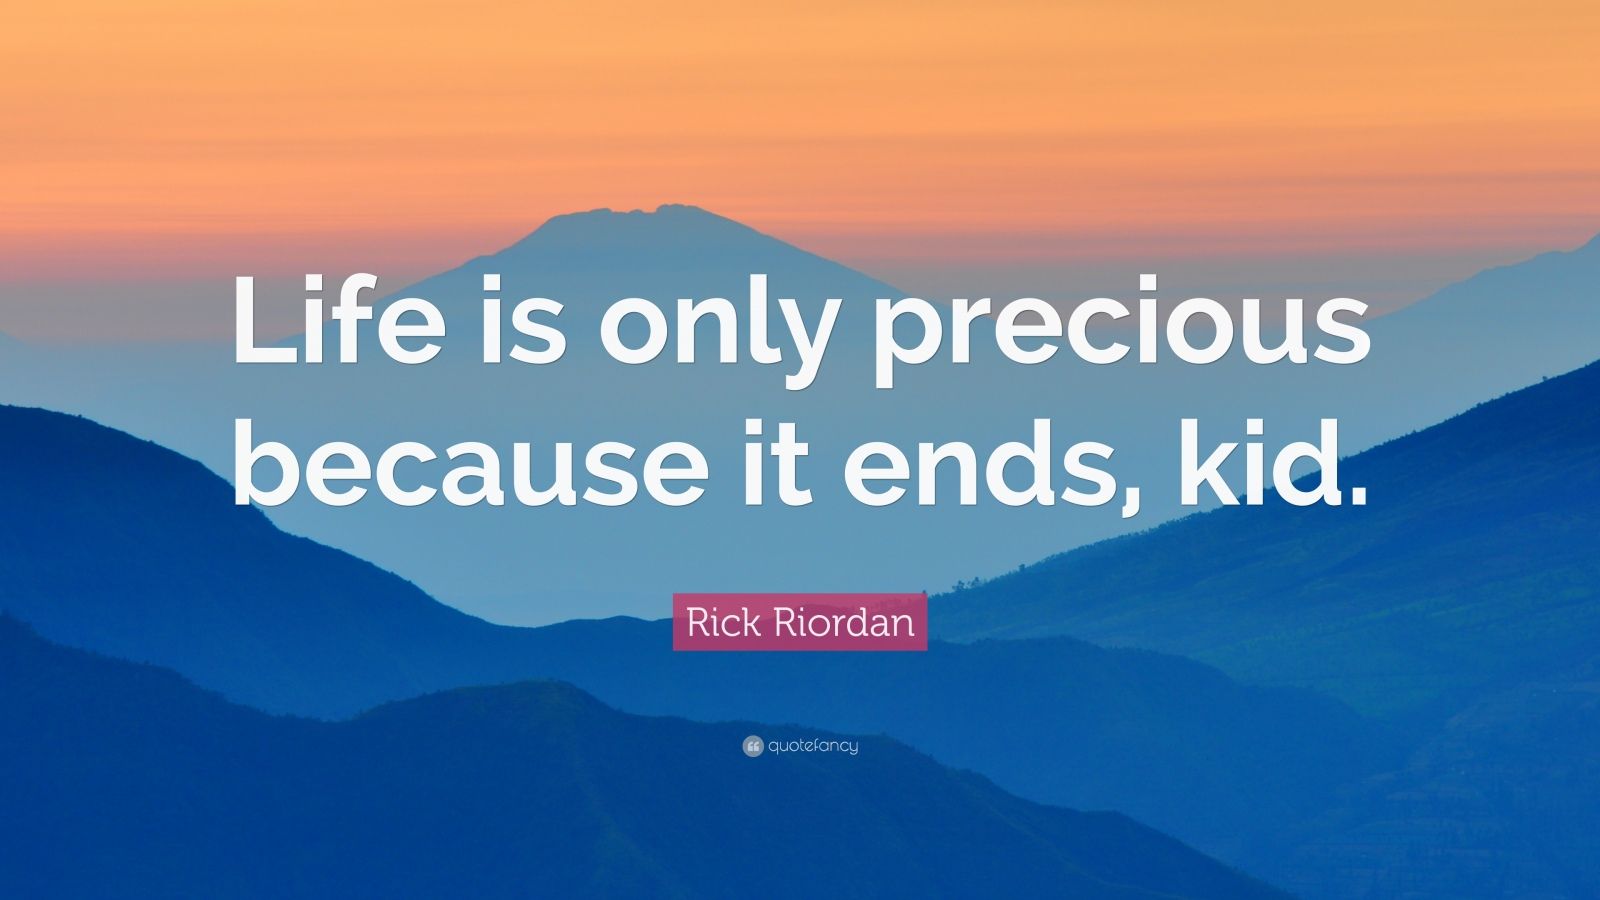 Rick Riordan Quote: “Life is only precious because it ends, kid.”